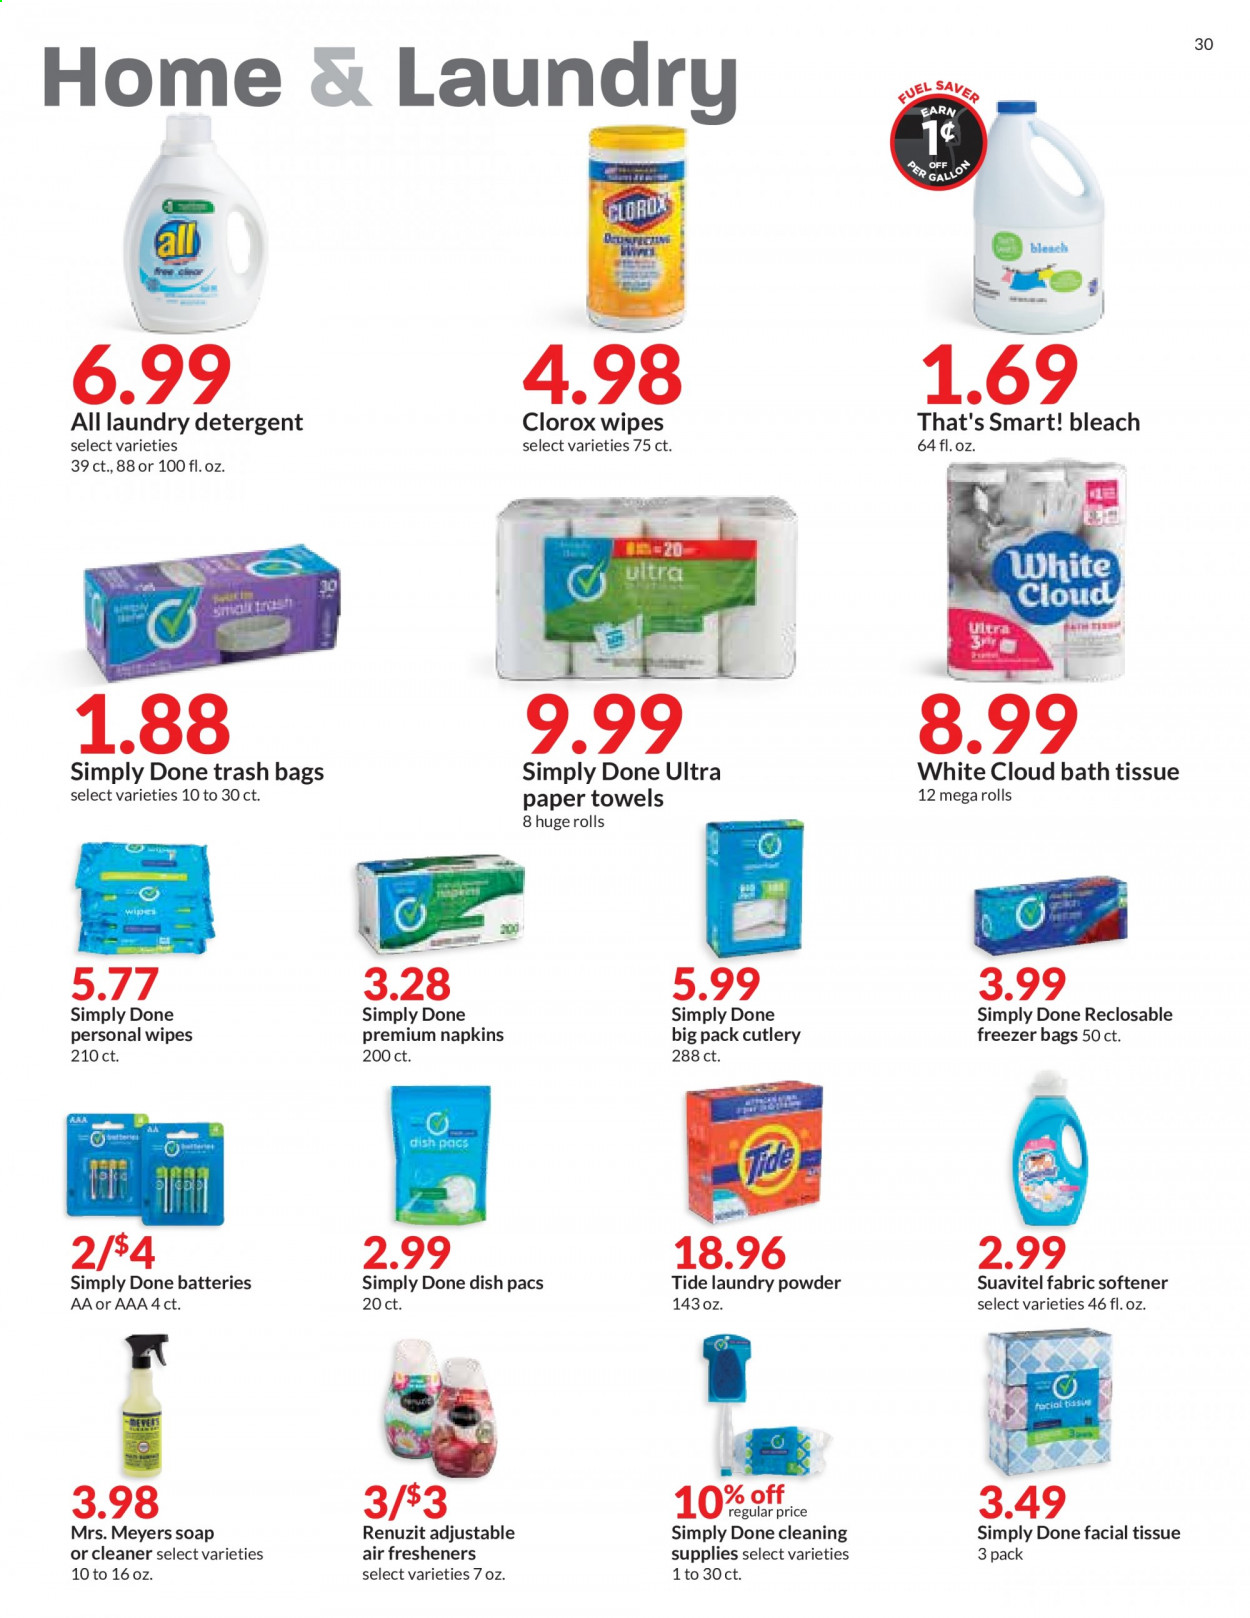 thumbnail - Hy-Vee Flyer - 06/30/2021 - 07/06/2021 - Sales products - wipes, napkins, bath tissue, kitchen towels, paper towels, detergent, cleaner, bleach, Clorox, Tide, fabric softener, laundry detergent, laundry powder, soap, trash bags, freezer bag, Renuzit, air freshener, battery, bag. Page 30.